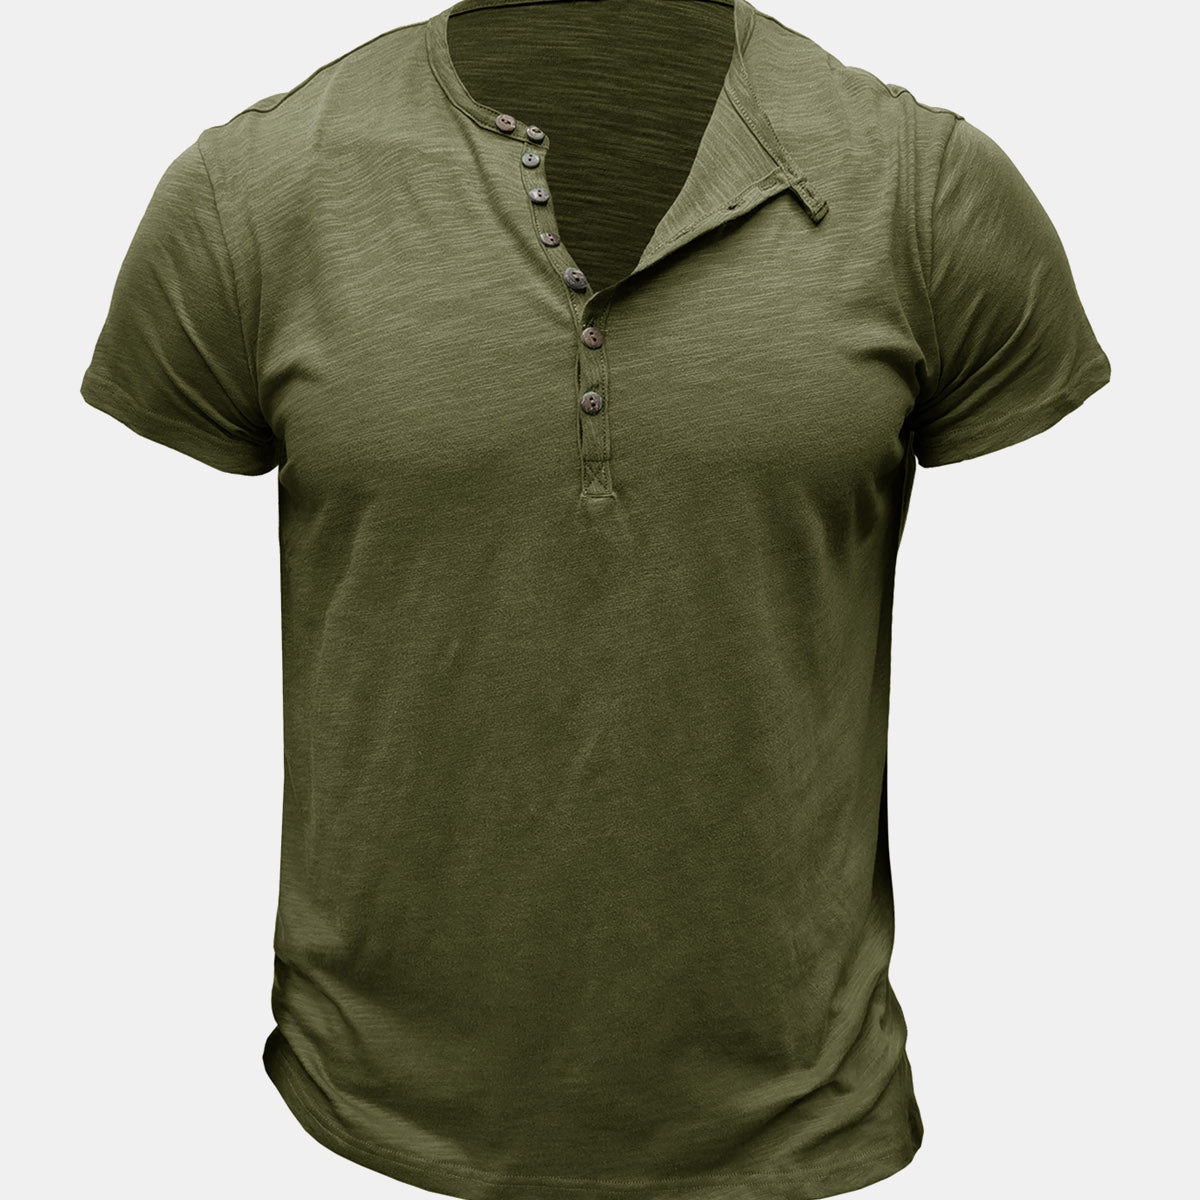 Men's Summer Casual Breathable Cotton Solid Color Short Sleeve T-Shirt